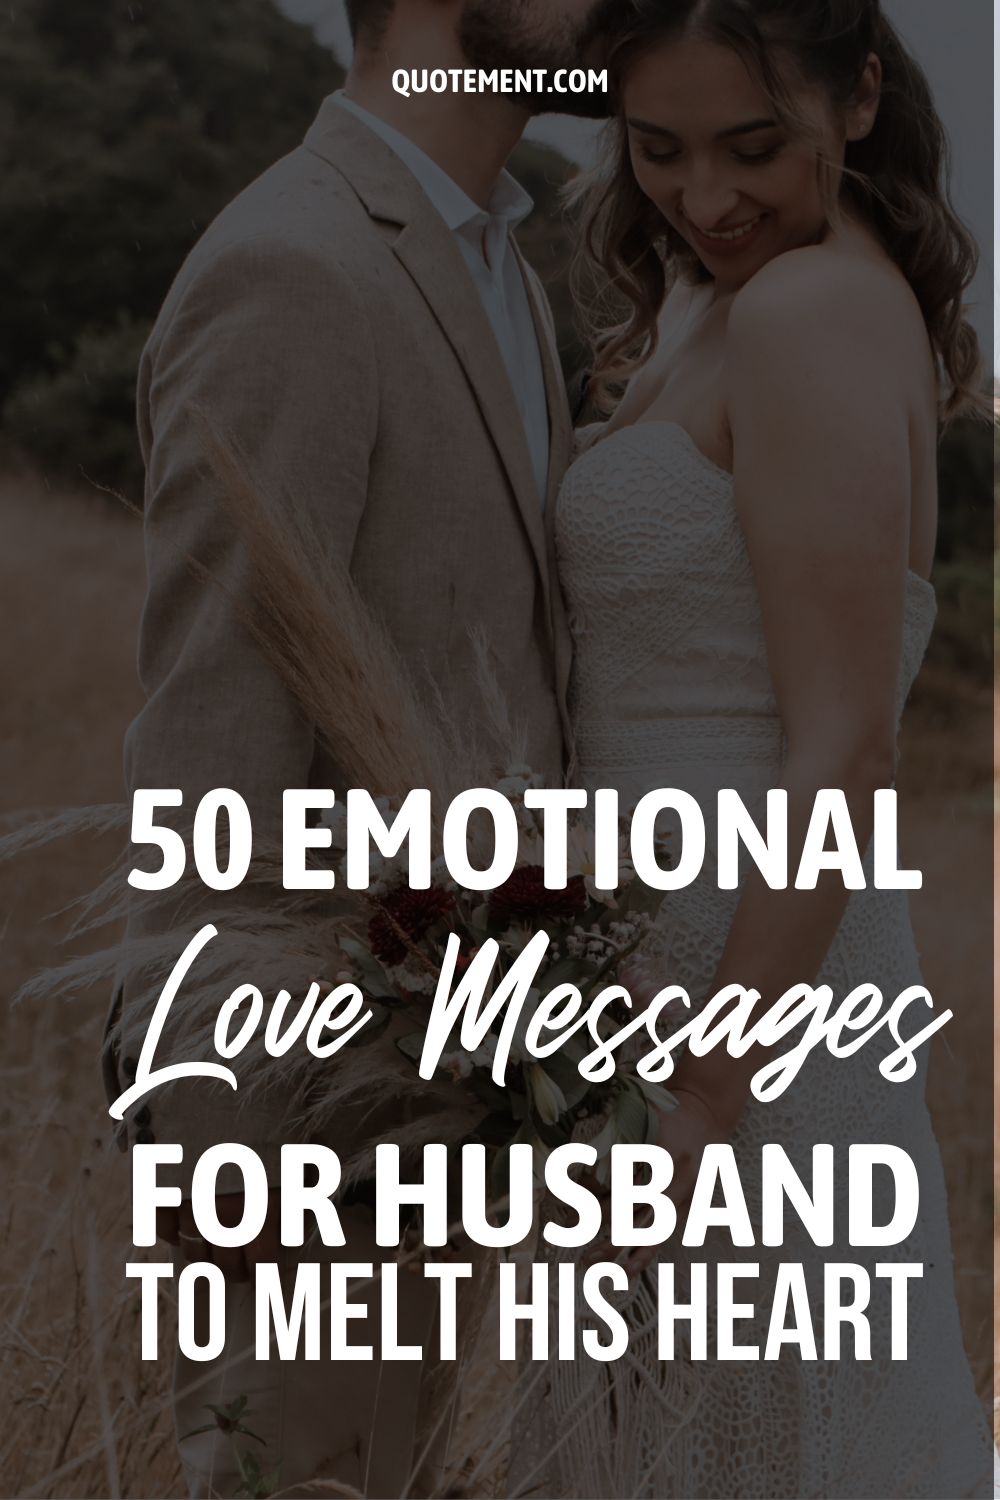 50 Emotional Love Messages For Husband To Melt His Heart
